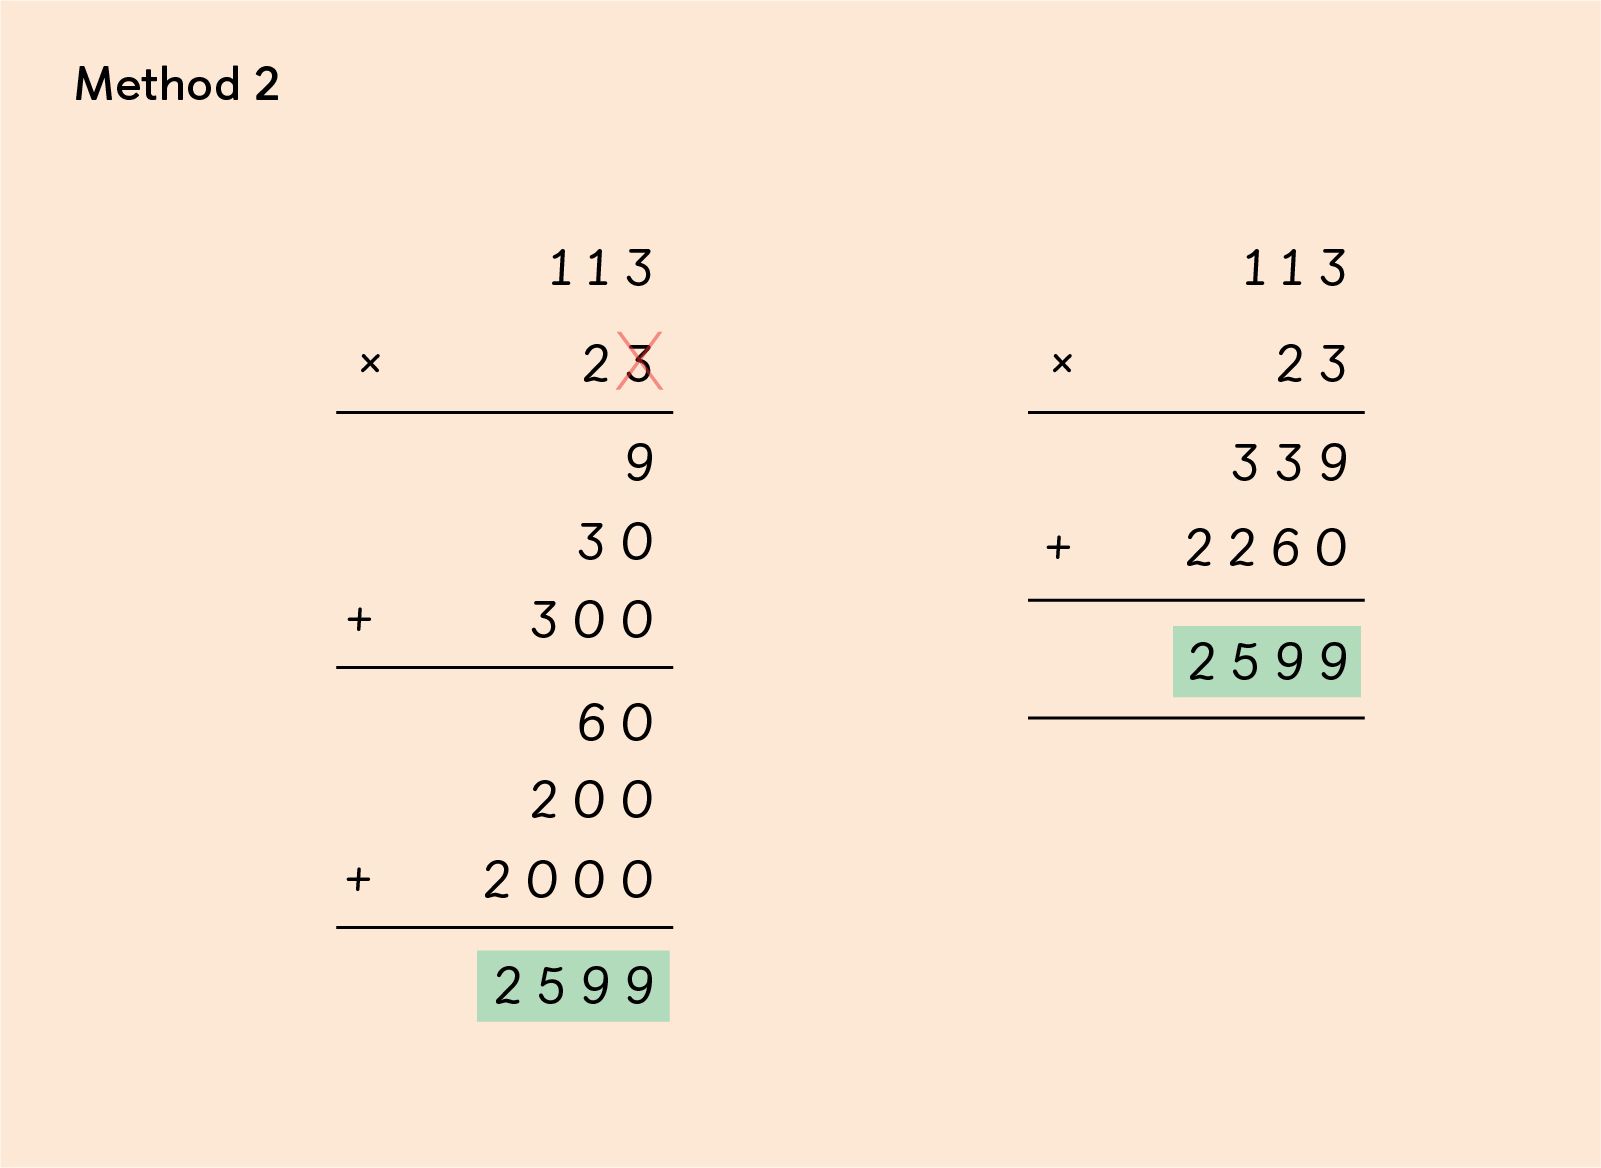 Method 2 To solve the maths multiplication problem 23 x 113. It was solved by using first the long way of writing out a multiplication equation and also by the short way of writing out the equation to reach the same answer of 2599.